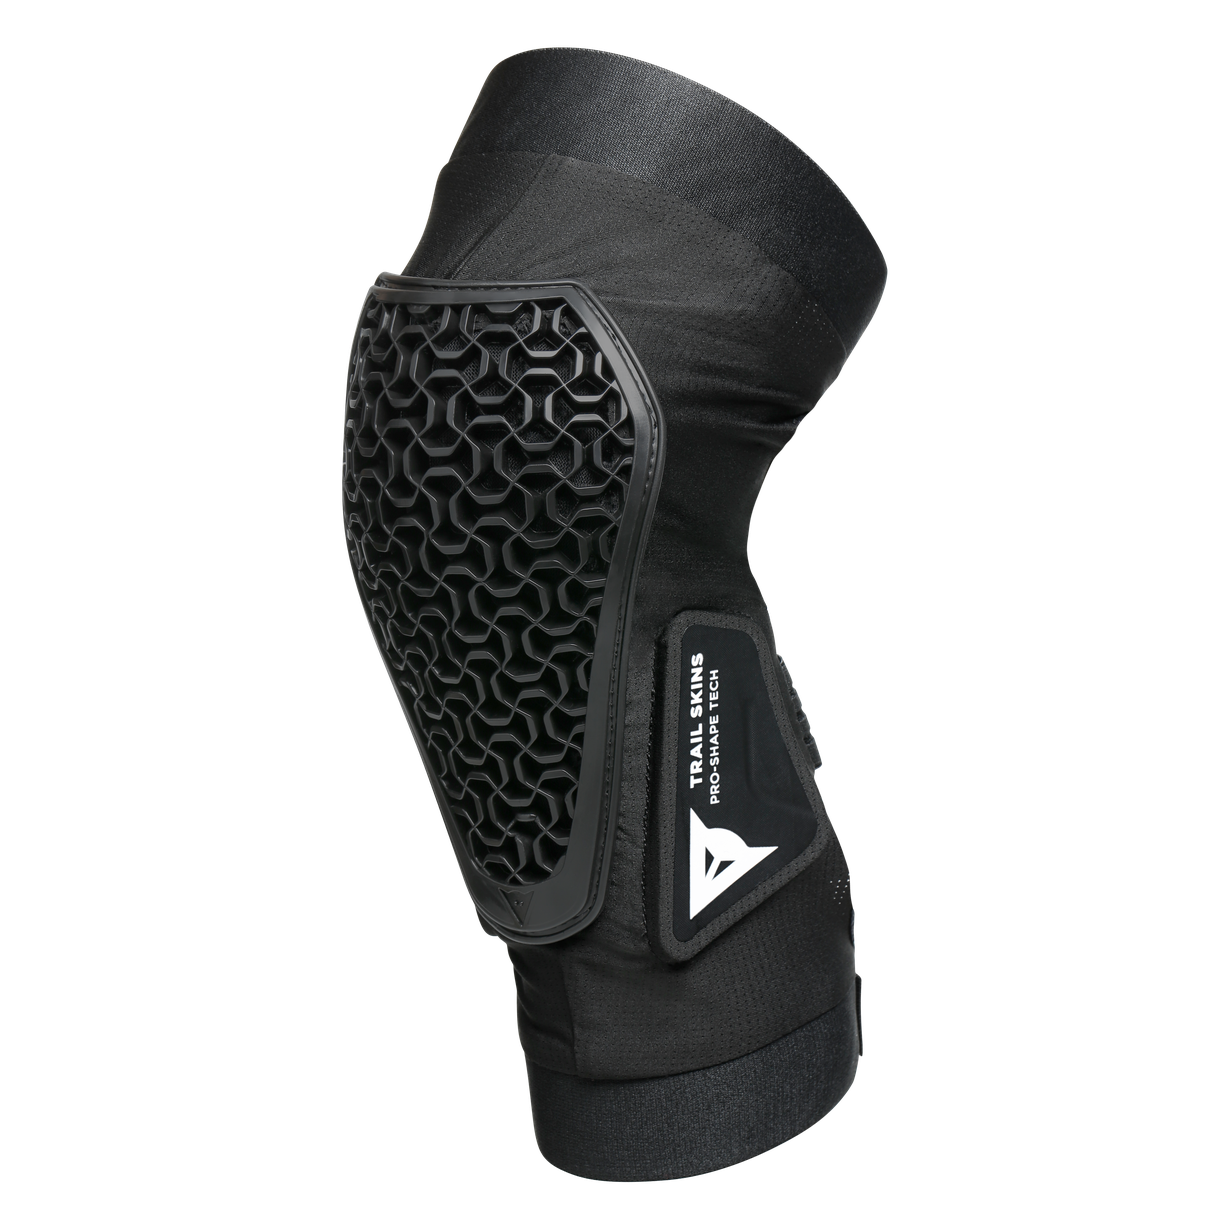 DAINESE Trail Skins Pro Knee Guards, black